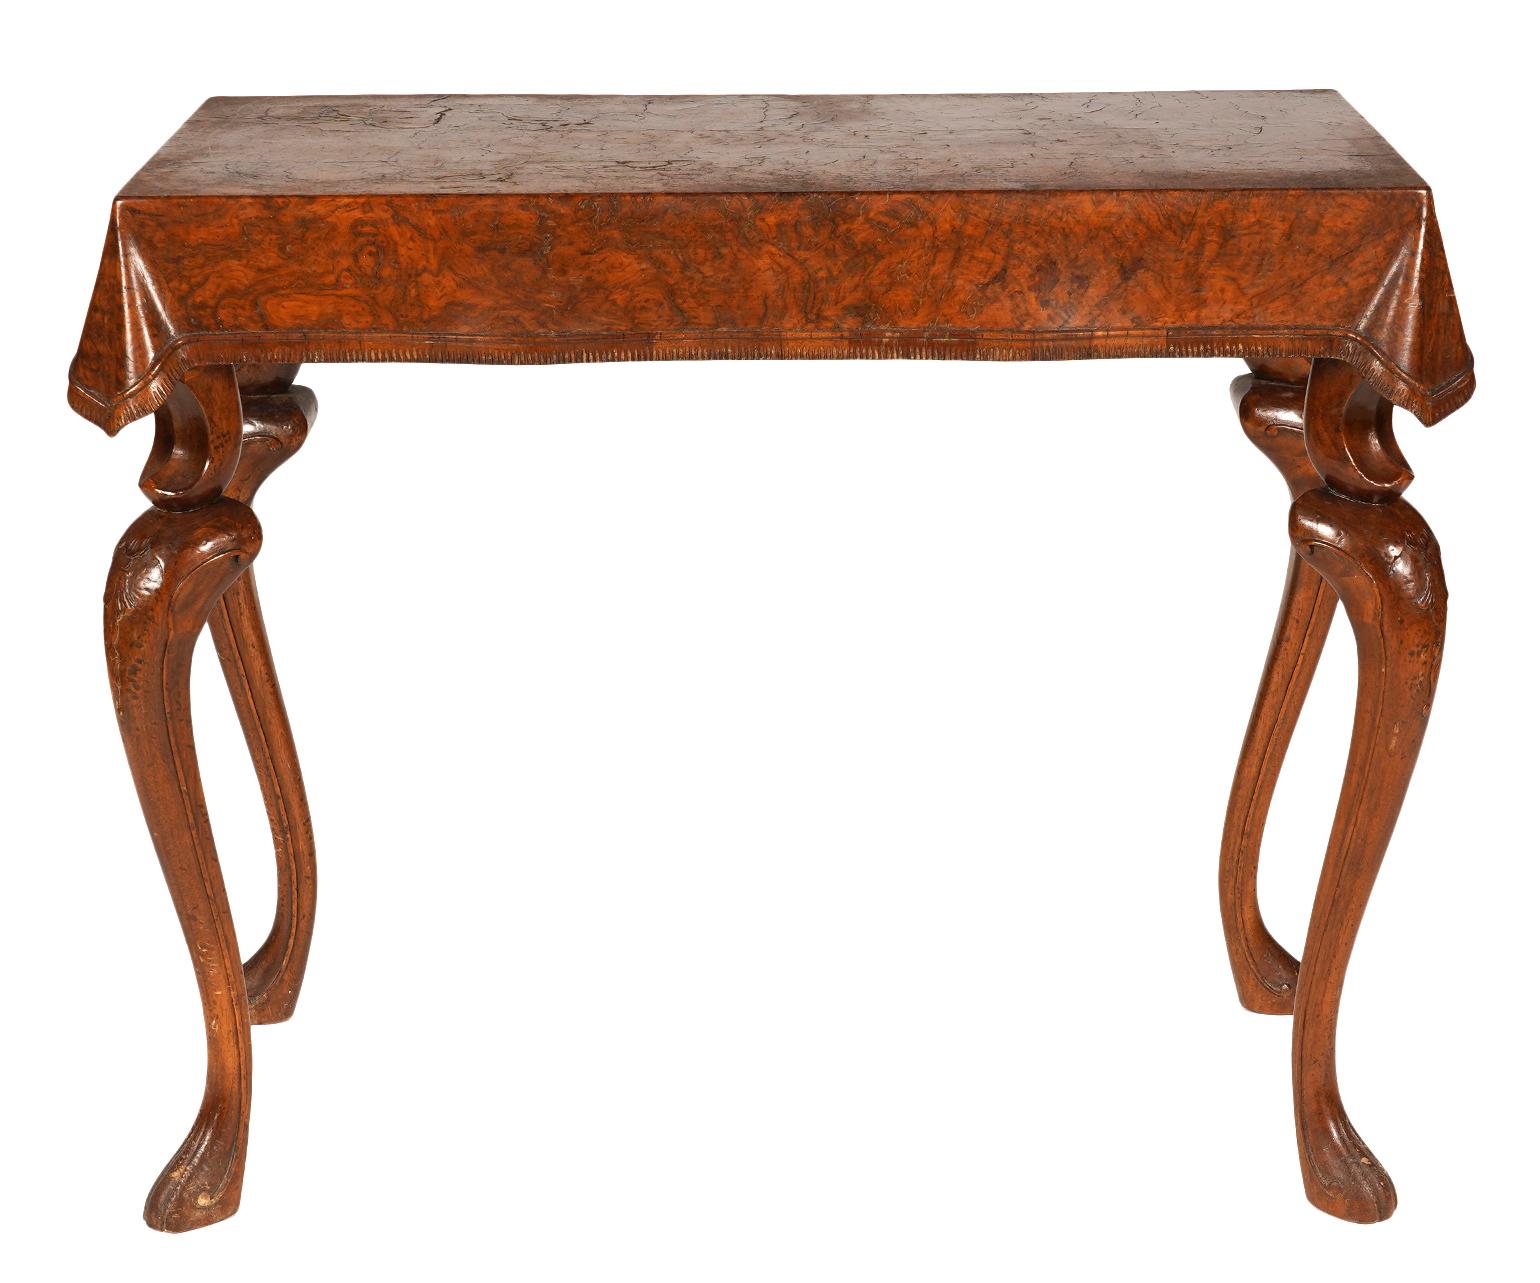 Uniquely carved with a draped table cloth and two step cabriole legs on paw feet these console tables offers a rare to find artistic quality. You can feel the life like carving of the table cloth, even the small undulations along the edge. The style